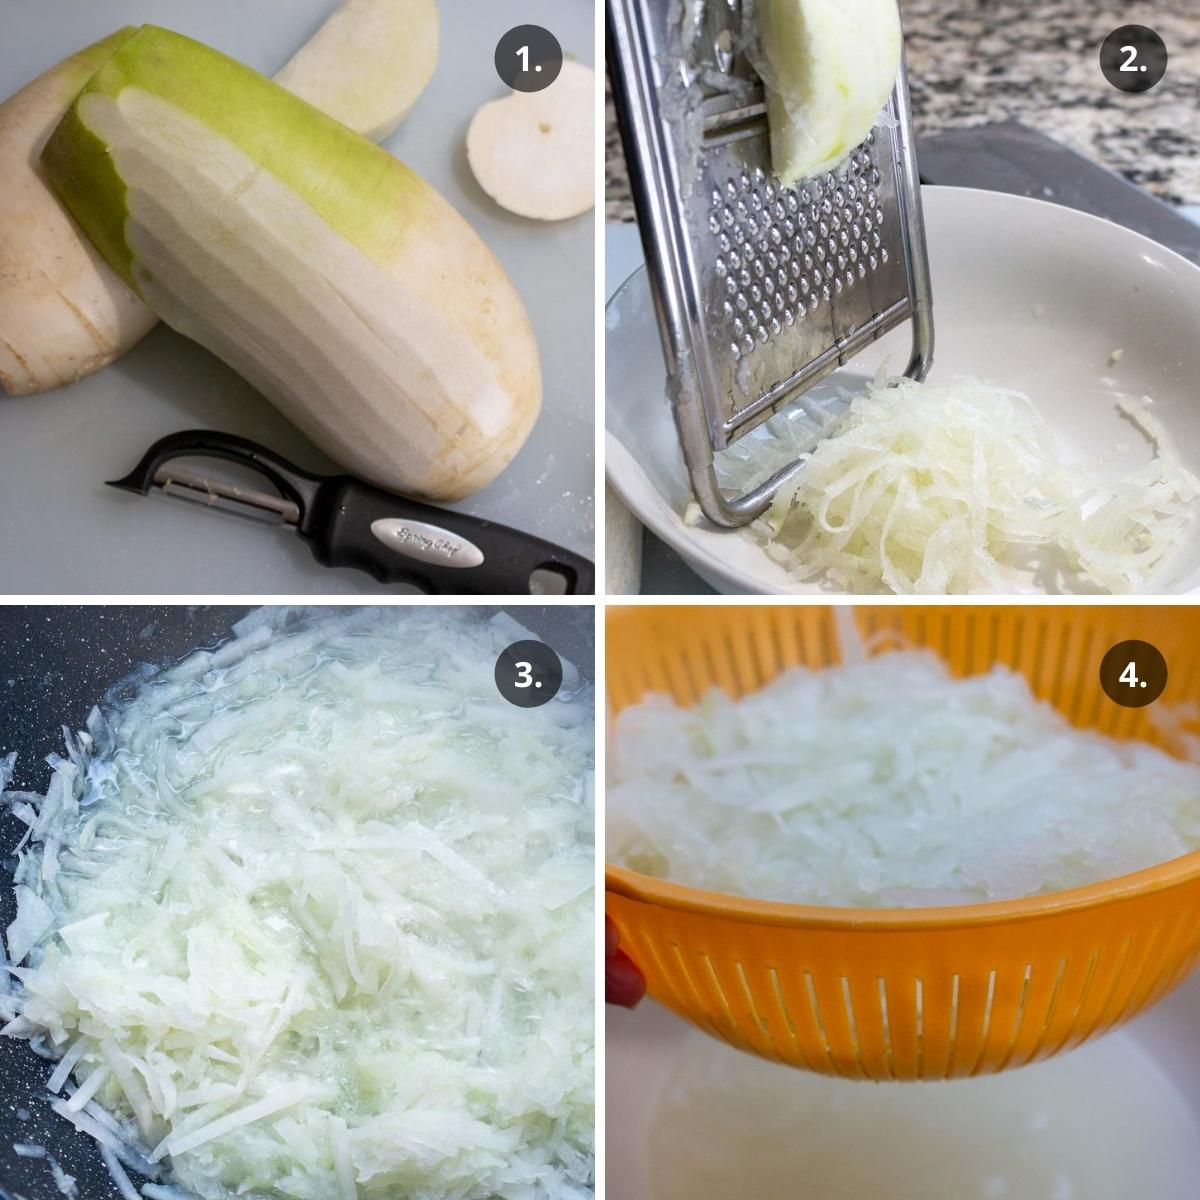 Prepare the daikon, peel, shred, cook and straining.